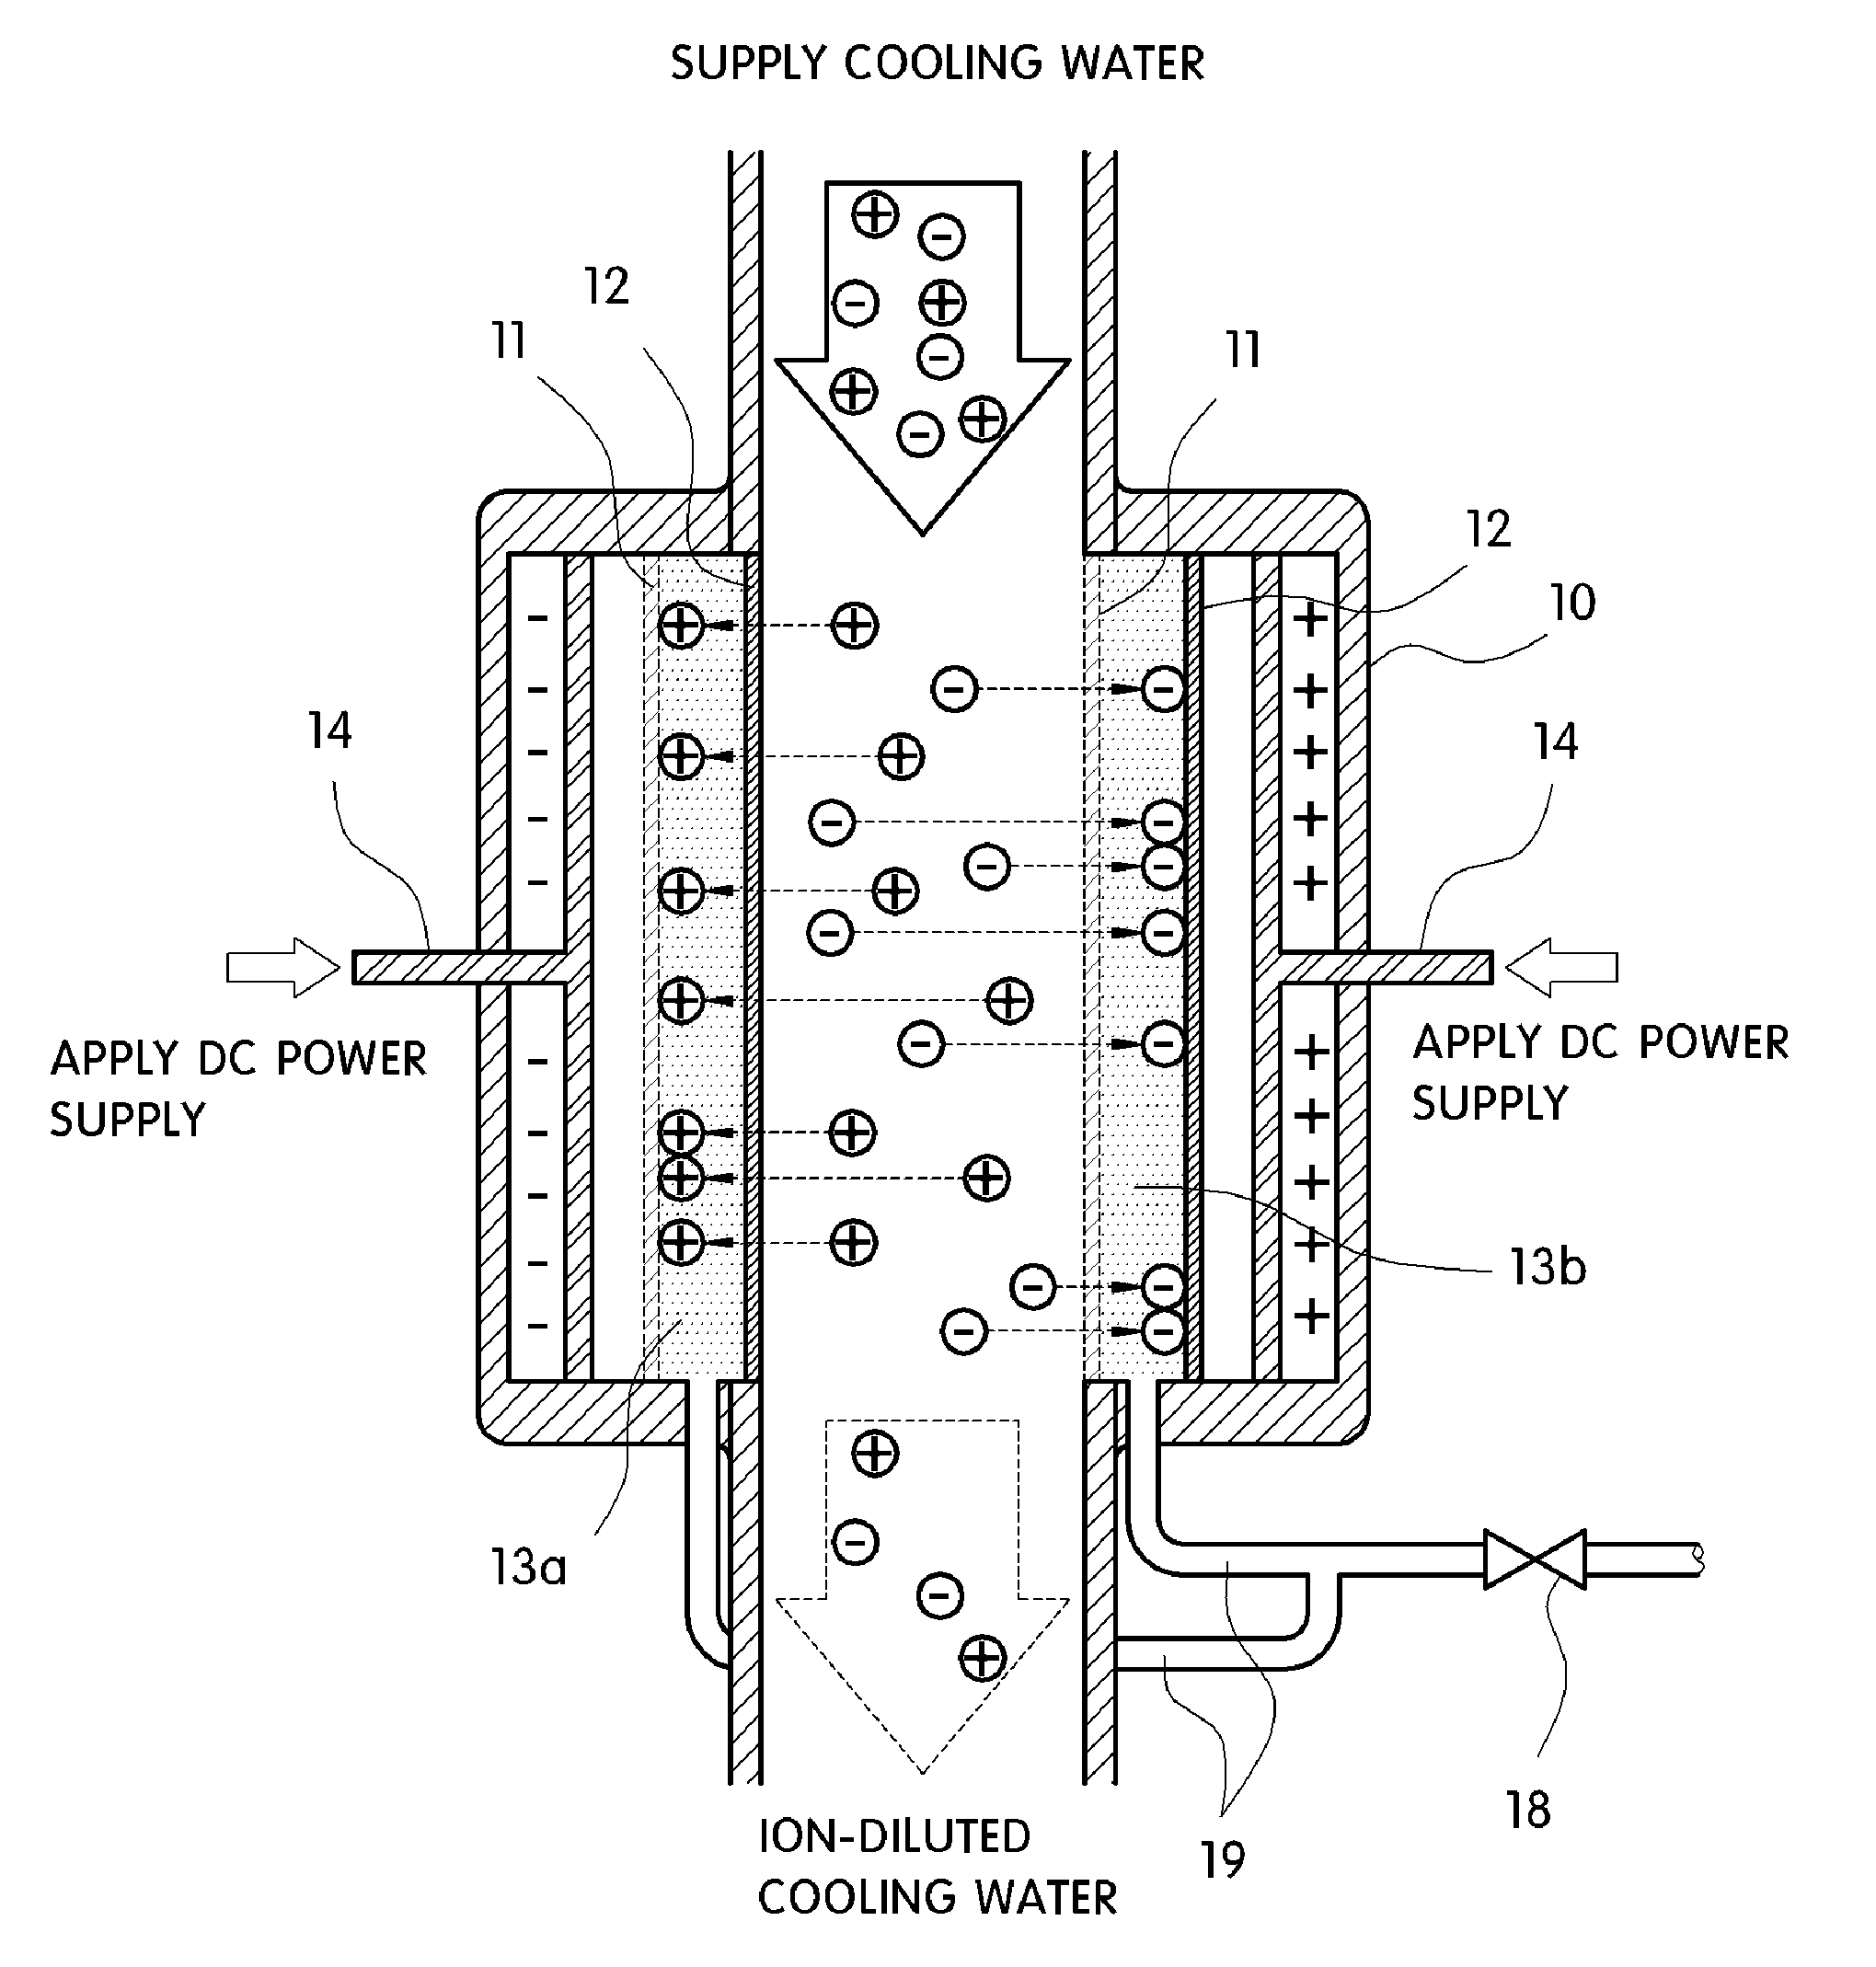 Apparatus for removing ions in cooling water for fuel cell vehicle